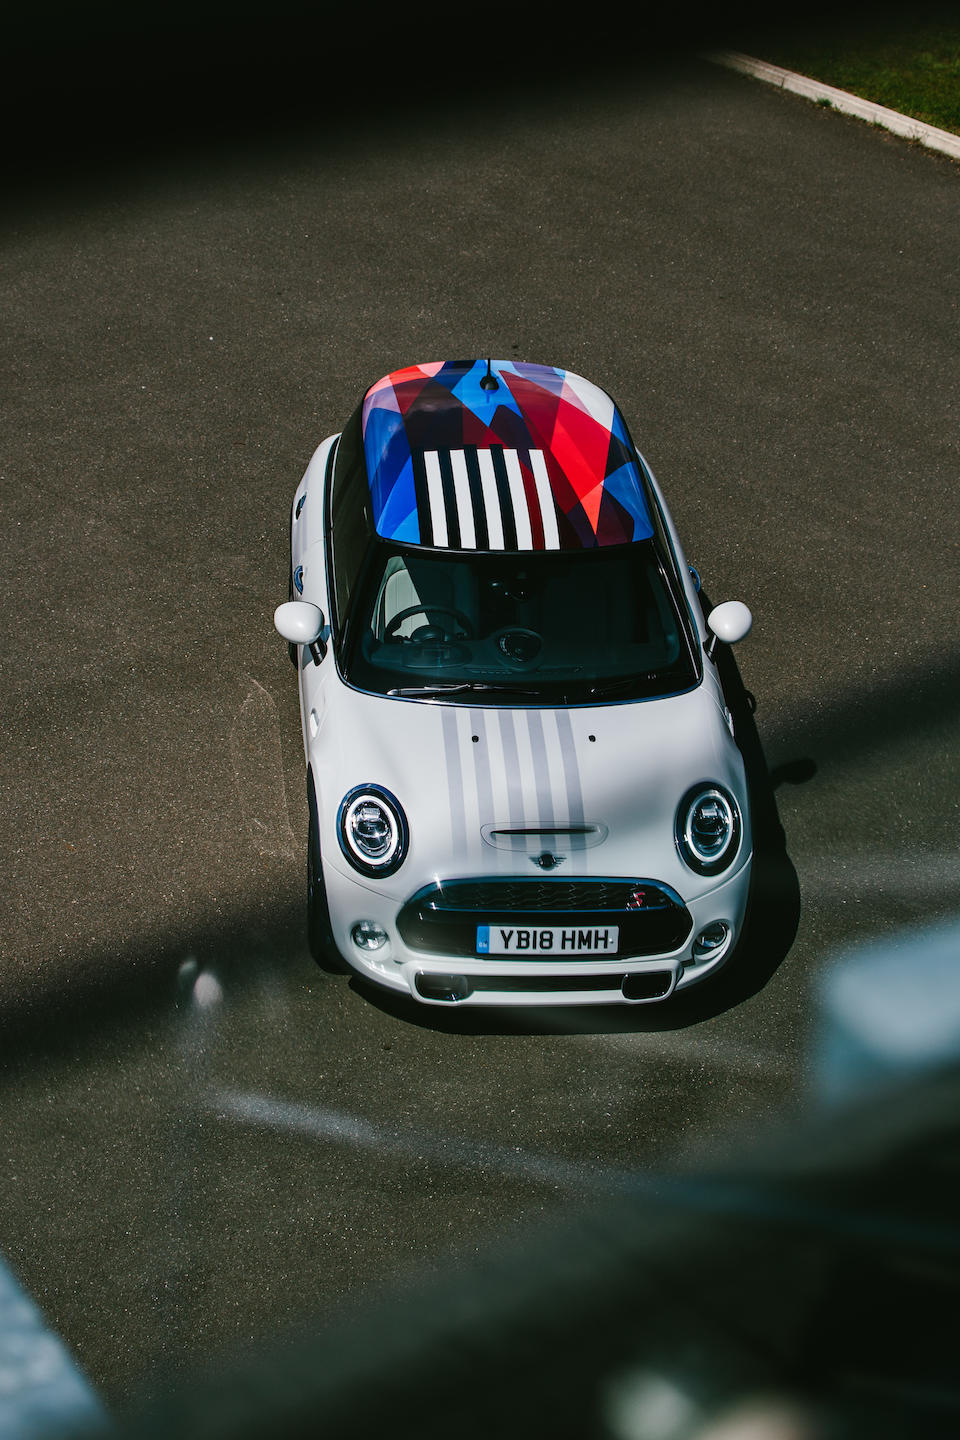 Built to celebrate the wedding of Prince Harry and Meghan Markle,2018 Mini Cooper&#160;'S' 3-Door Hatch  Chassis no. TM82290